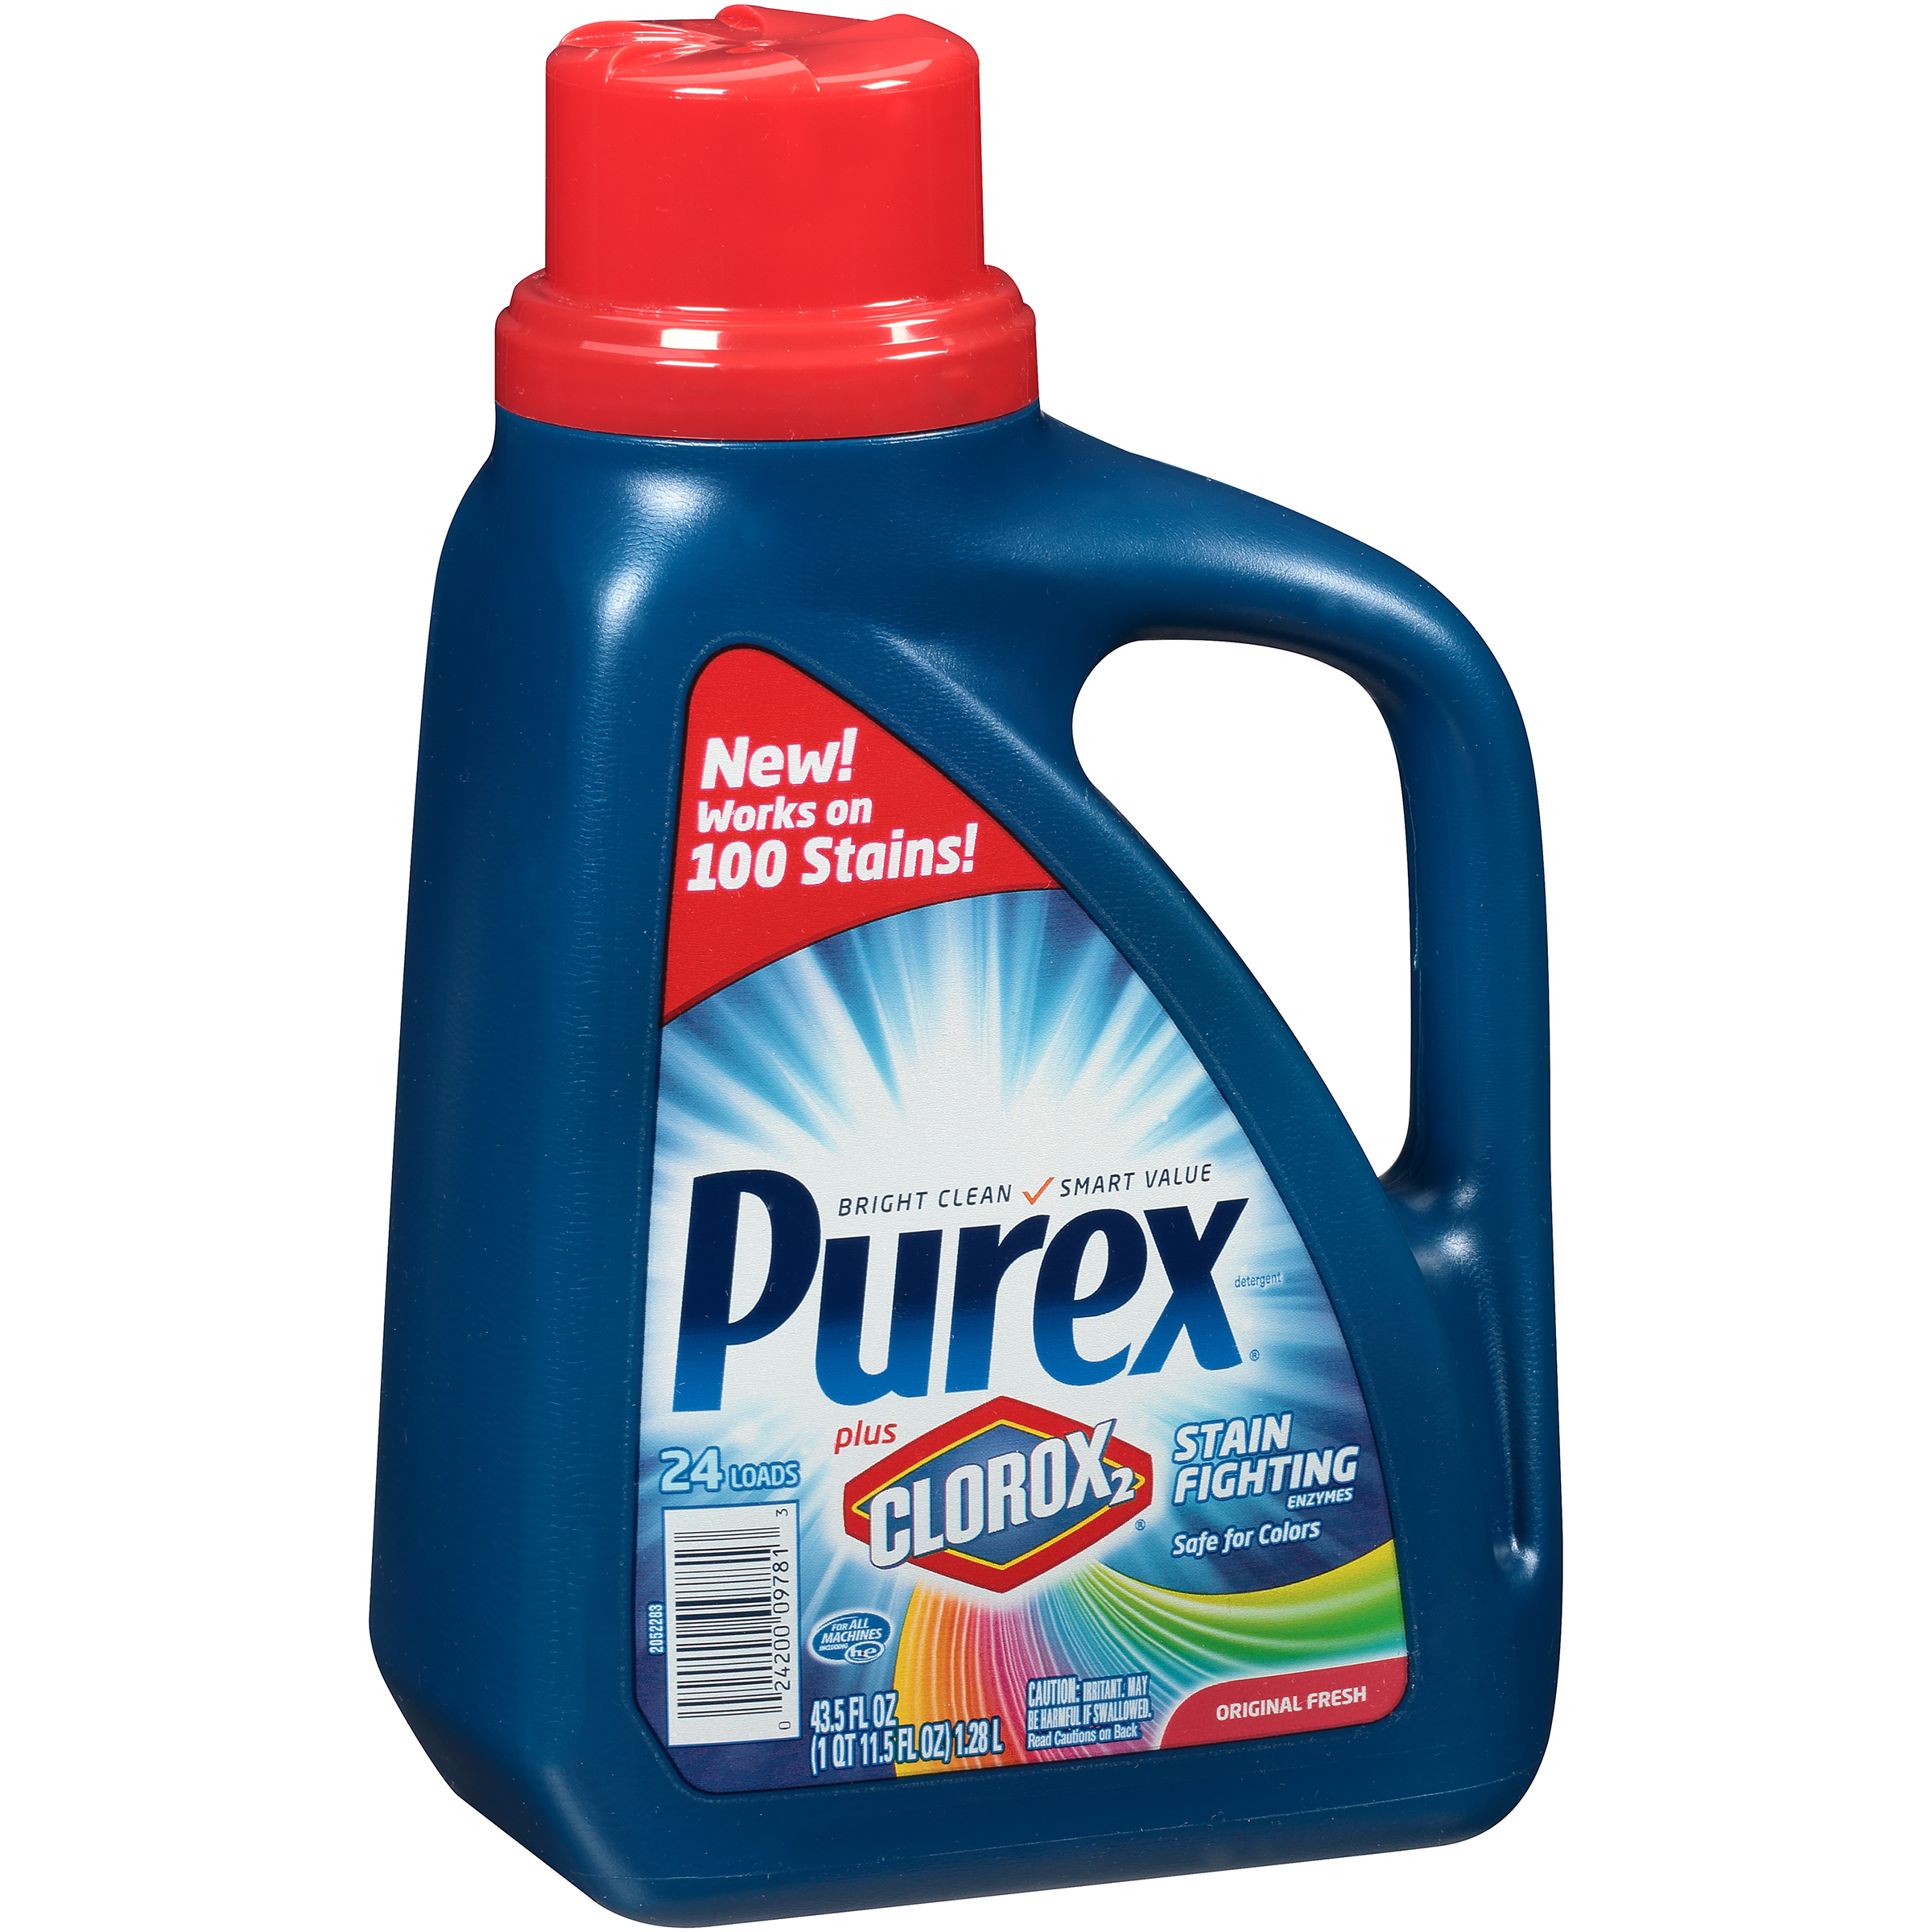 UPC 024200097813 product image for Plus Clorox2 Stain Fighting Enzymes Original Fresh Laundry Detergent 43.5 FL OZ | upcitemdb.com